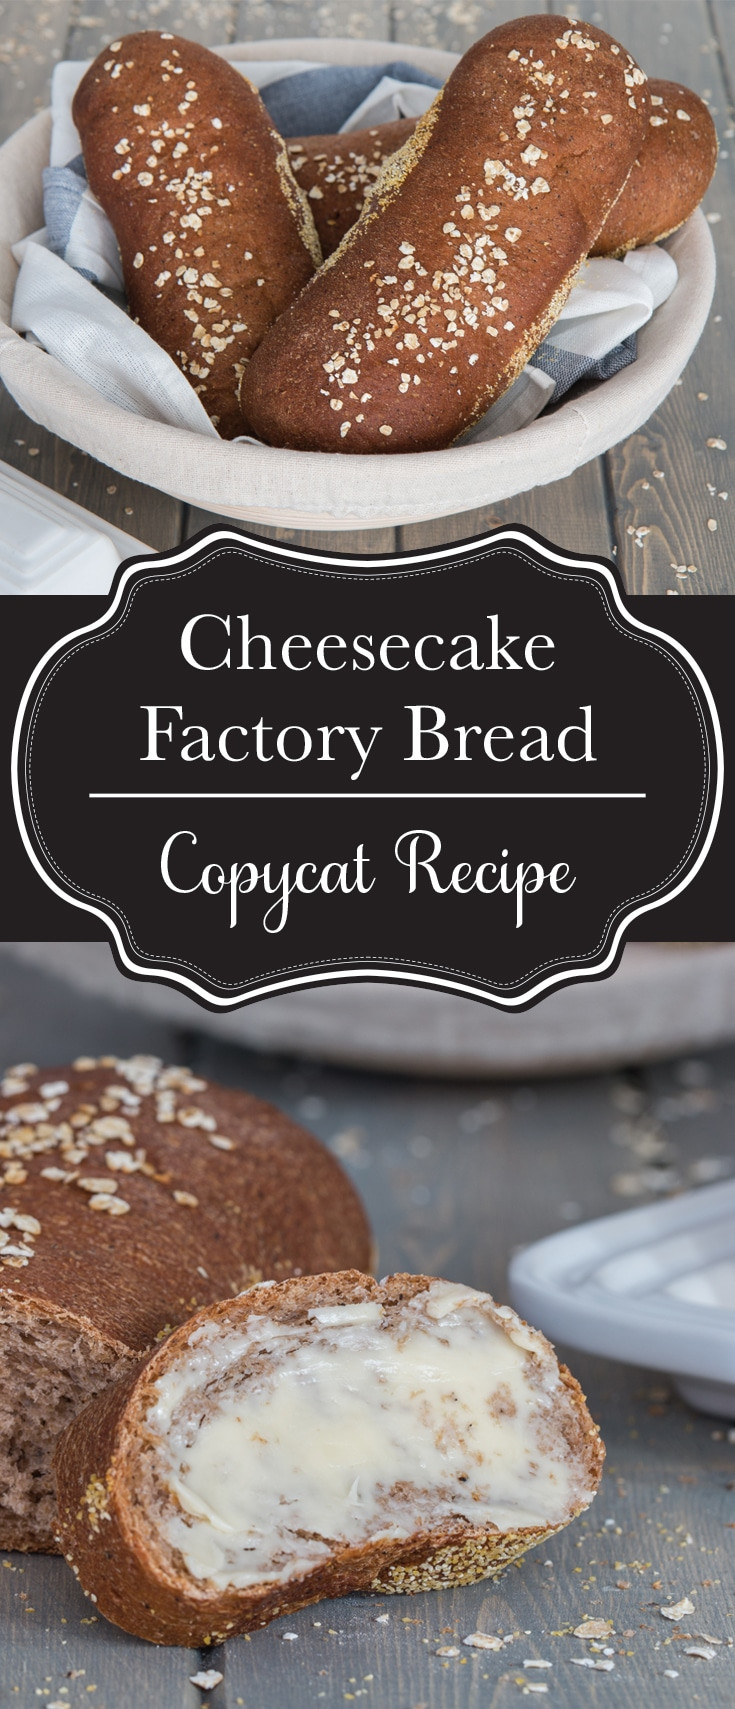 Cheesecake Factory Recipe
 Cheesecake Factory Brown Bread My most popular recipe